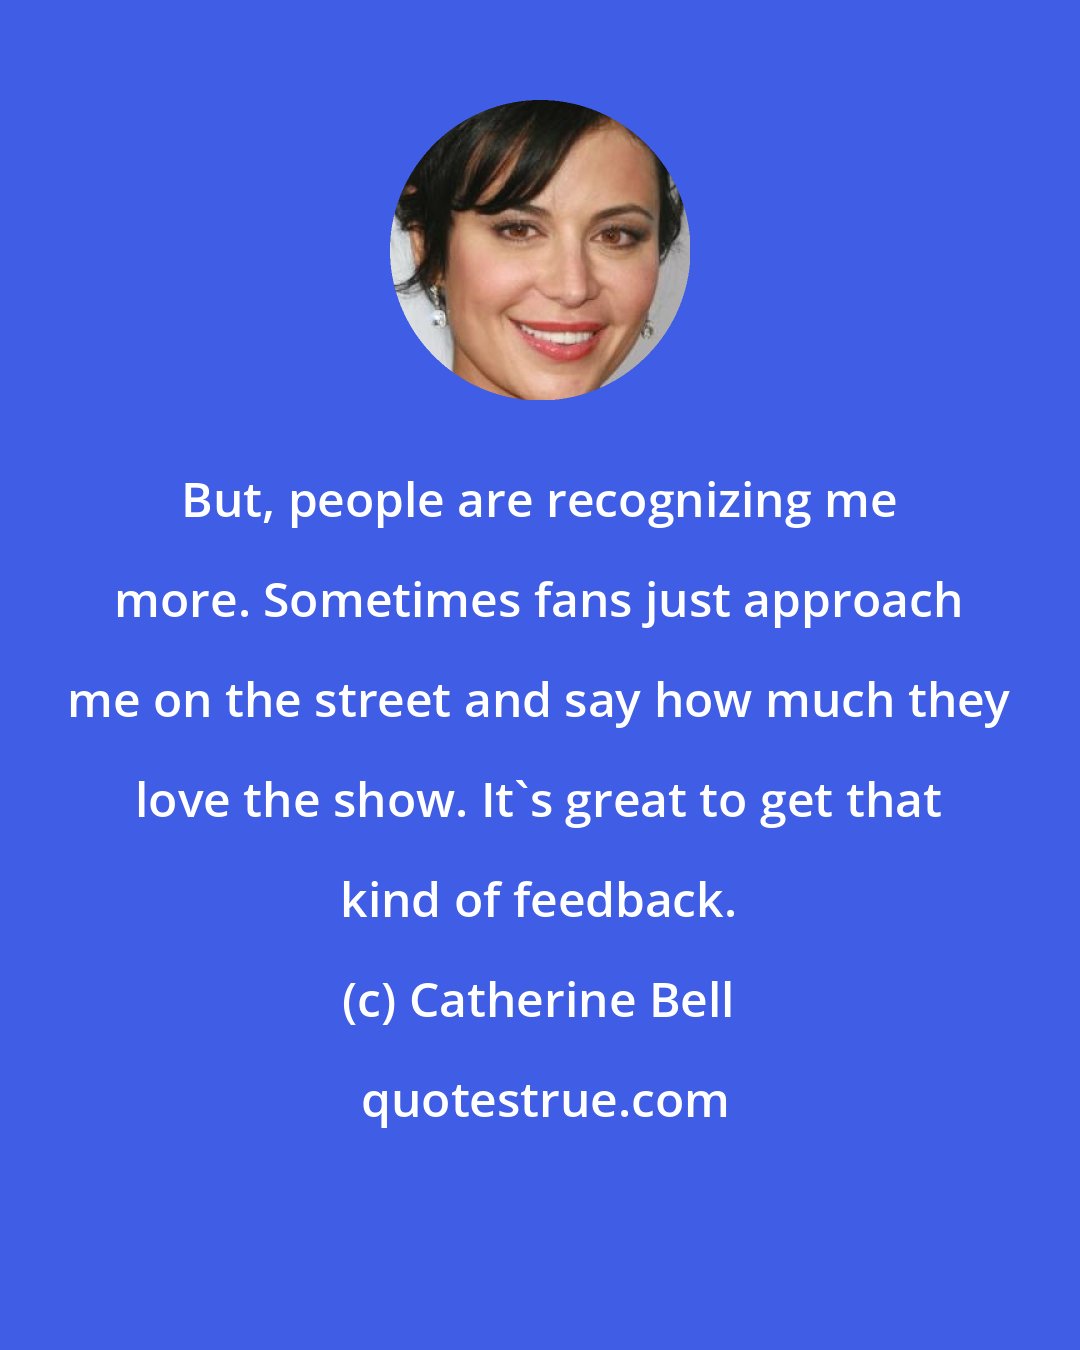 Catherine Bell: But, people are recognizing me more. Sometimes fans just approach me on the street and say how much they love the show. It's great to get that kind of feedback.